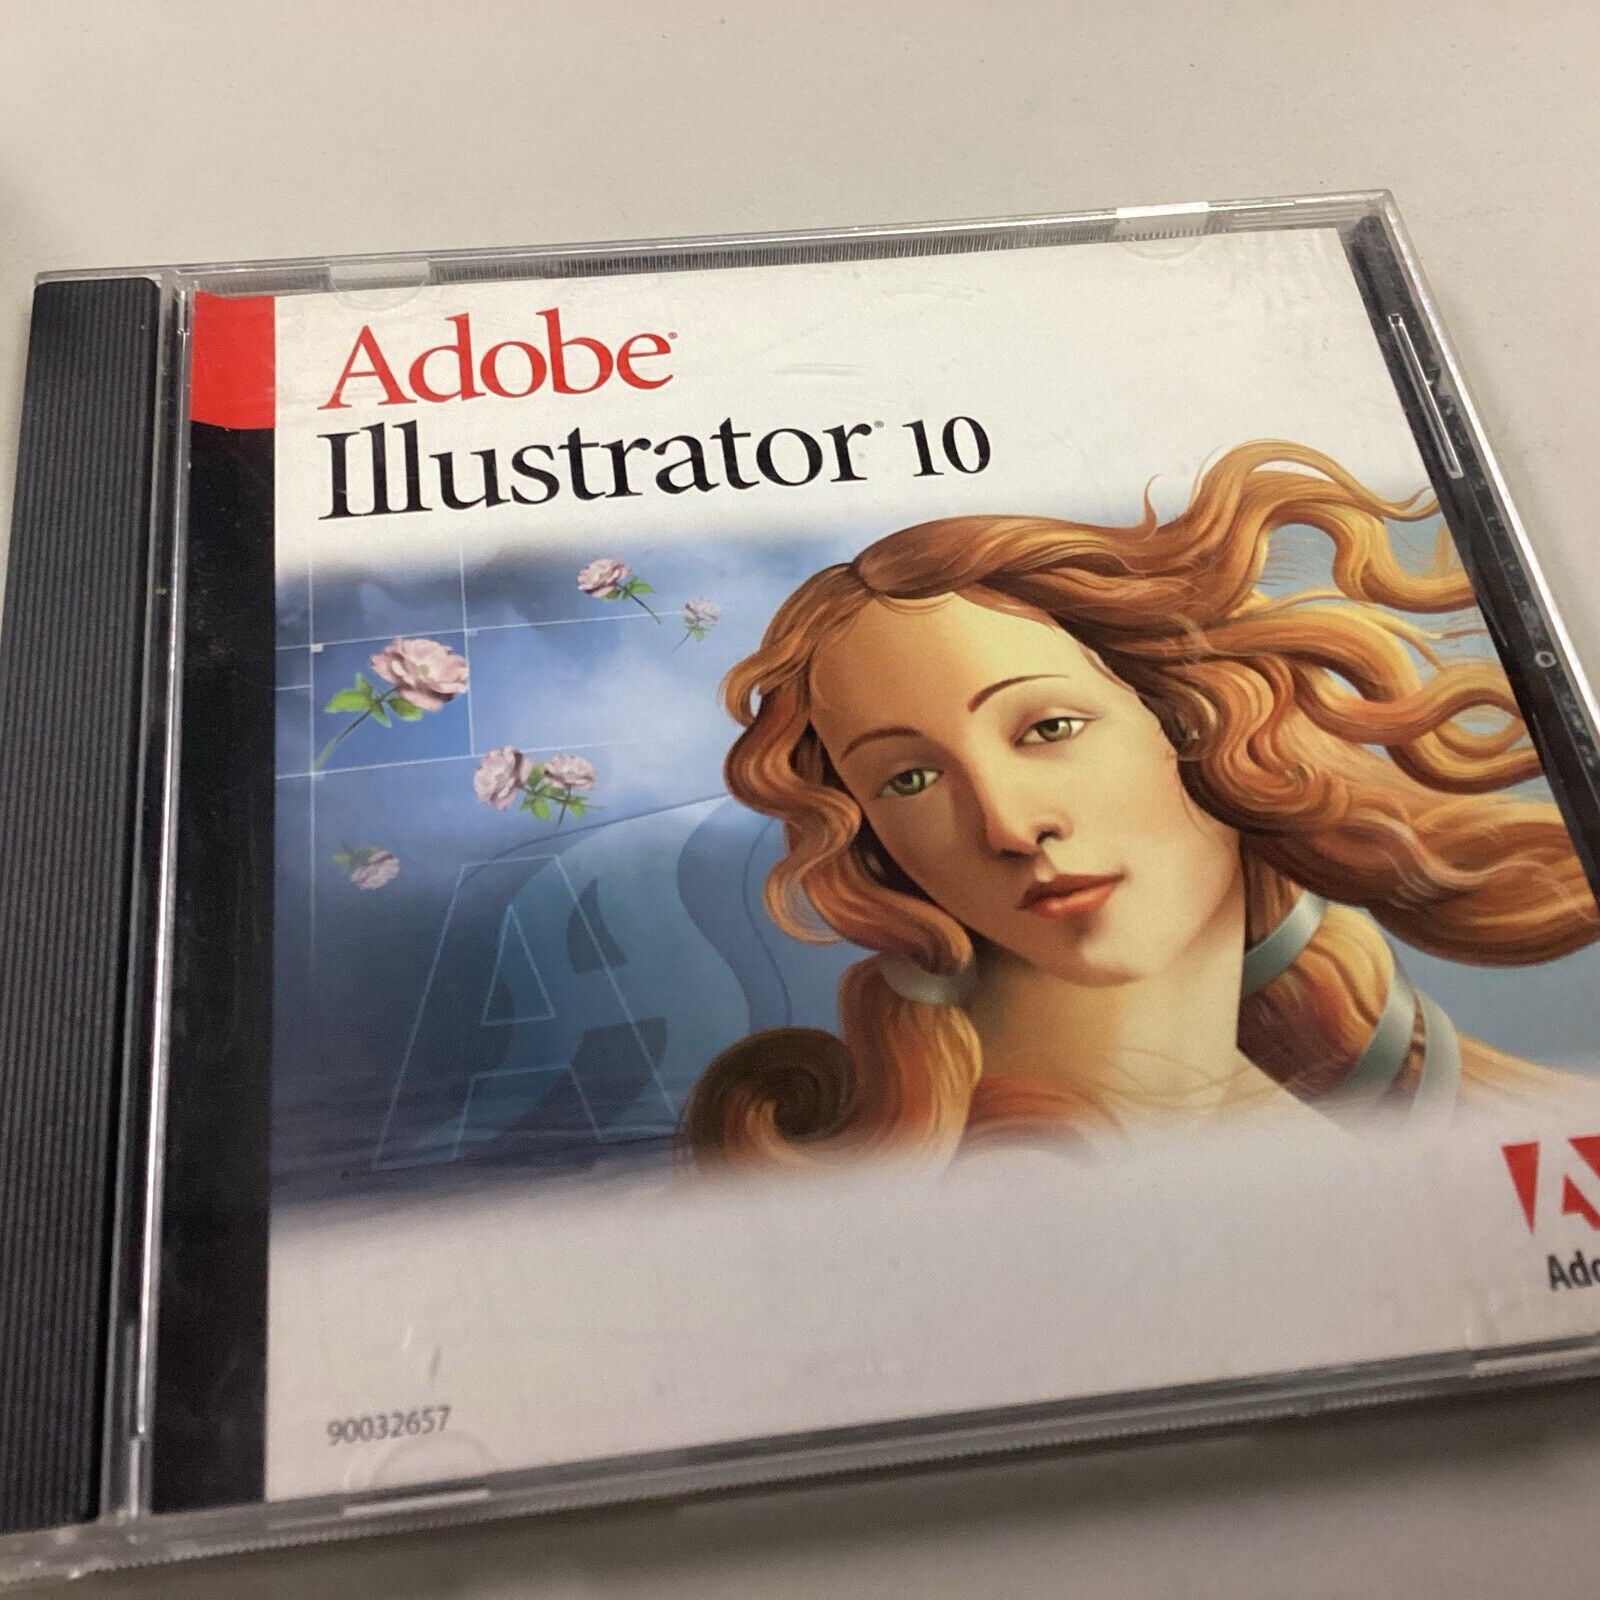 Preowned Adobe Illustrator 10 for Macintosh With Serial Number